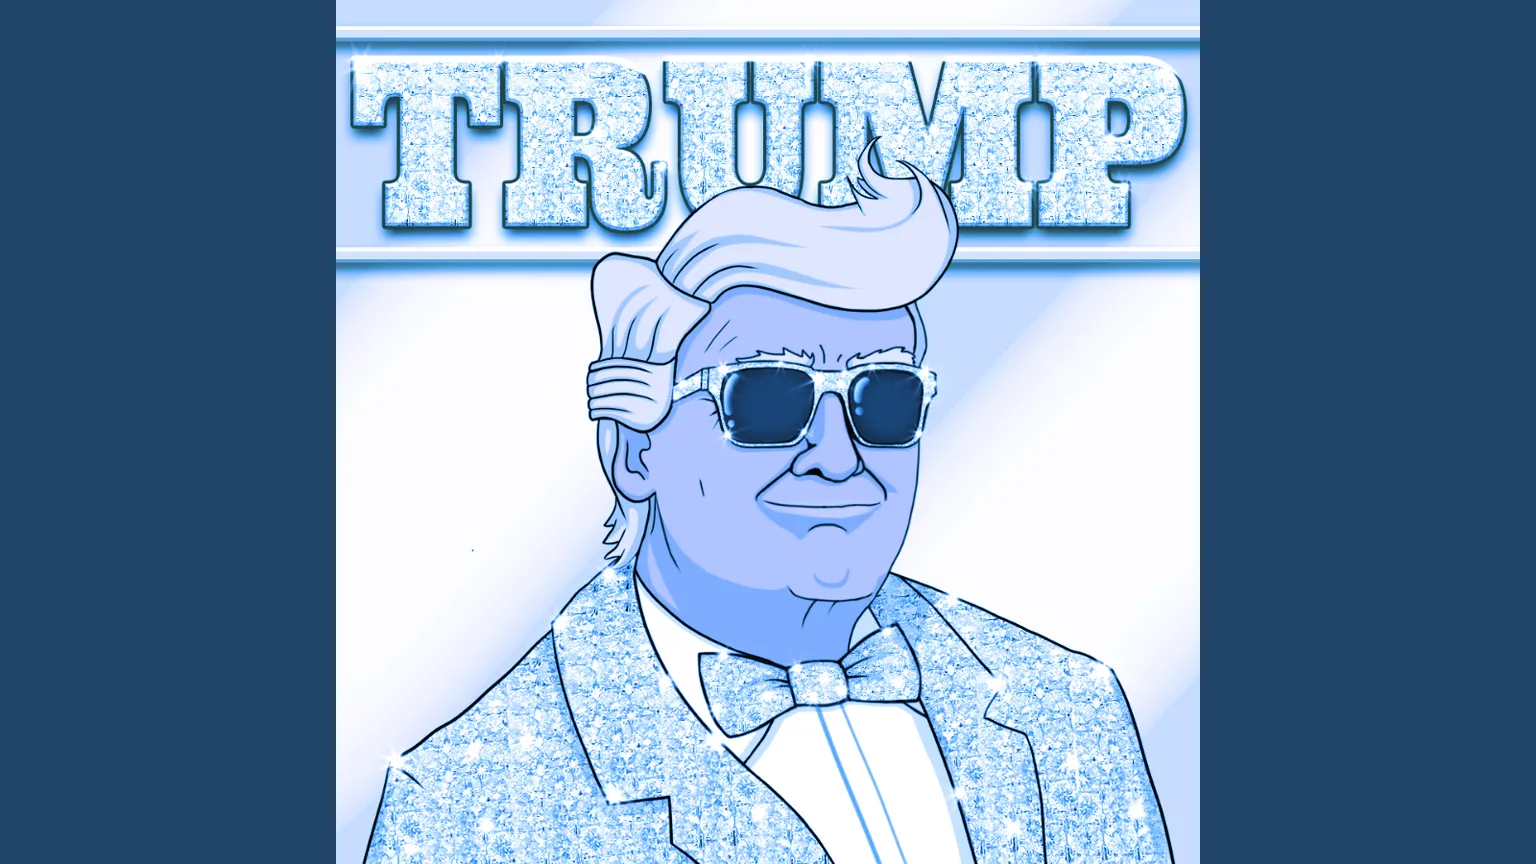 An "Official CryptoTRUMP Club" NFT